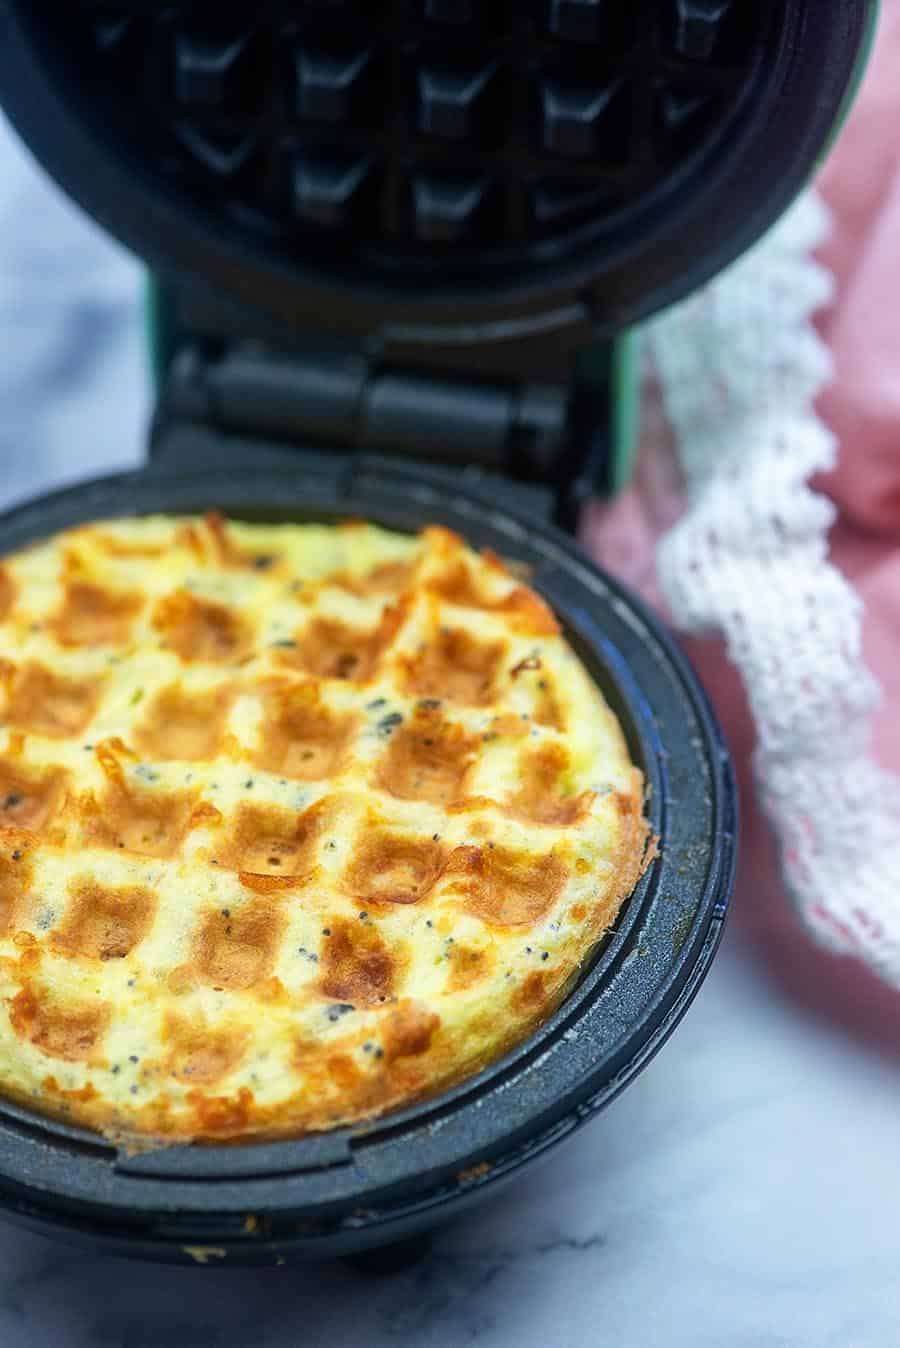 A chaffle being cooked in a mini waffle maker